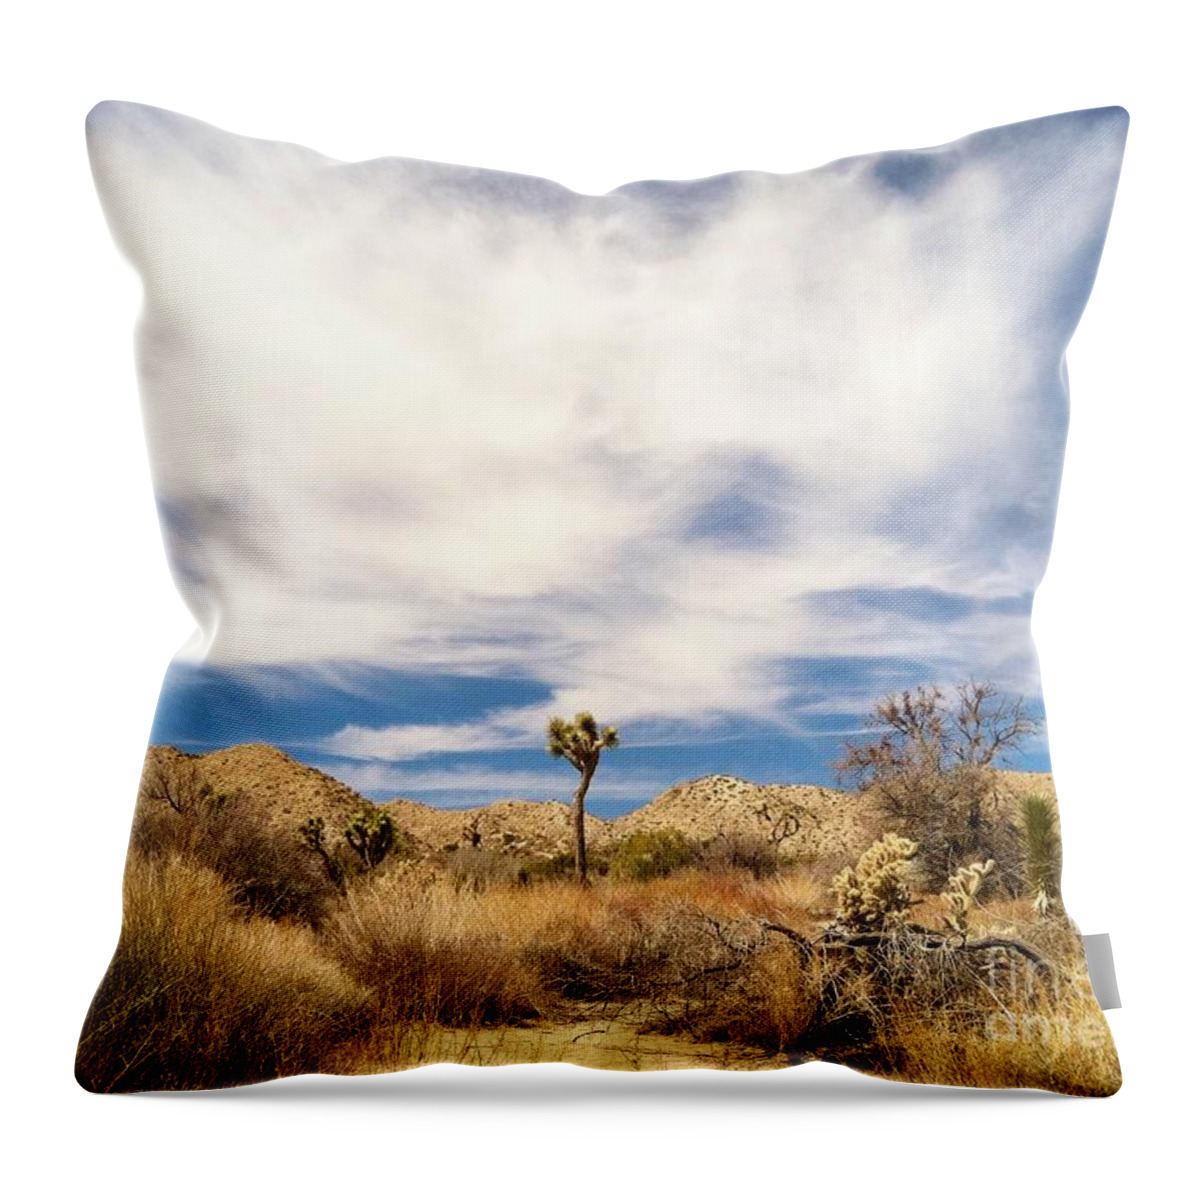 Yucca Valley California Throw Pillow featuring the photograph Joshua Beauty by Angela J Wright